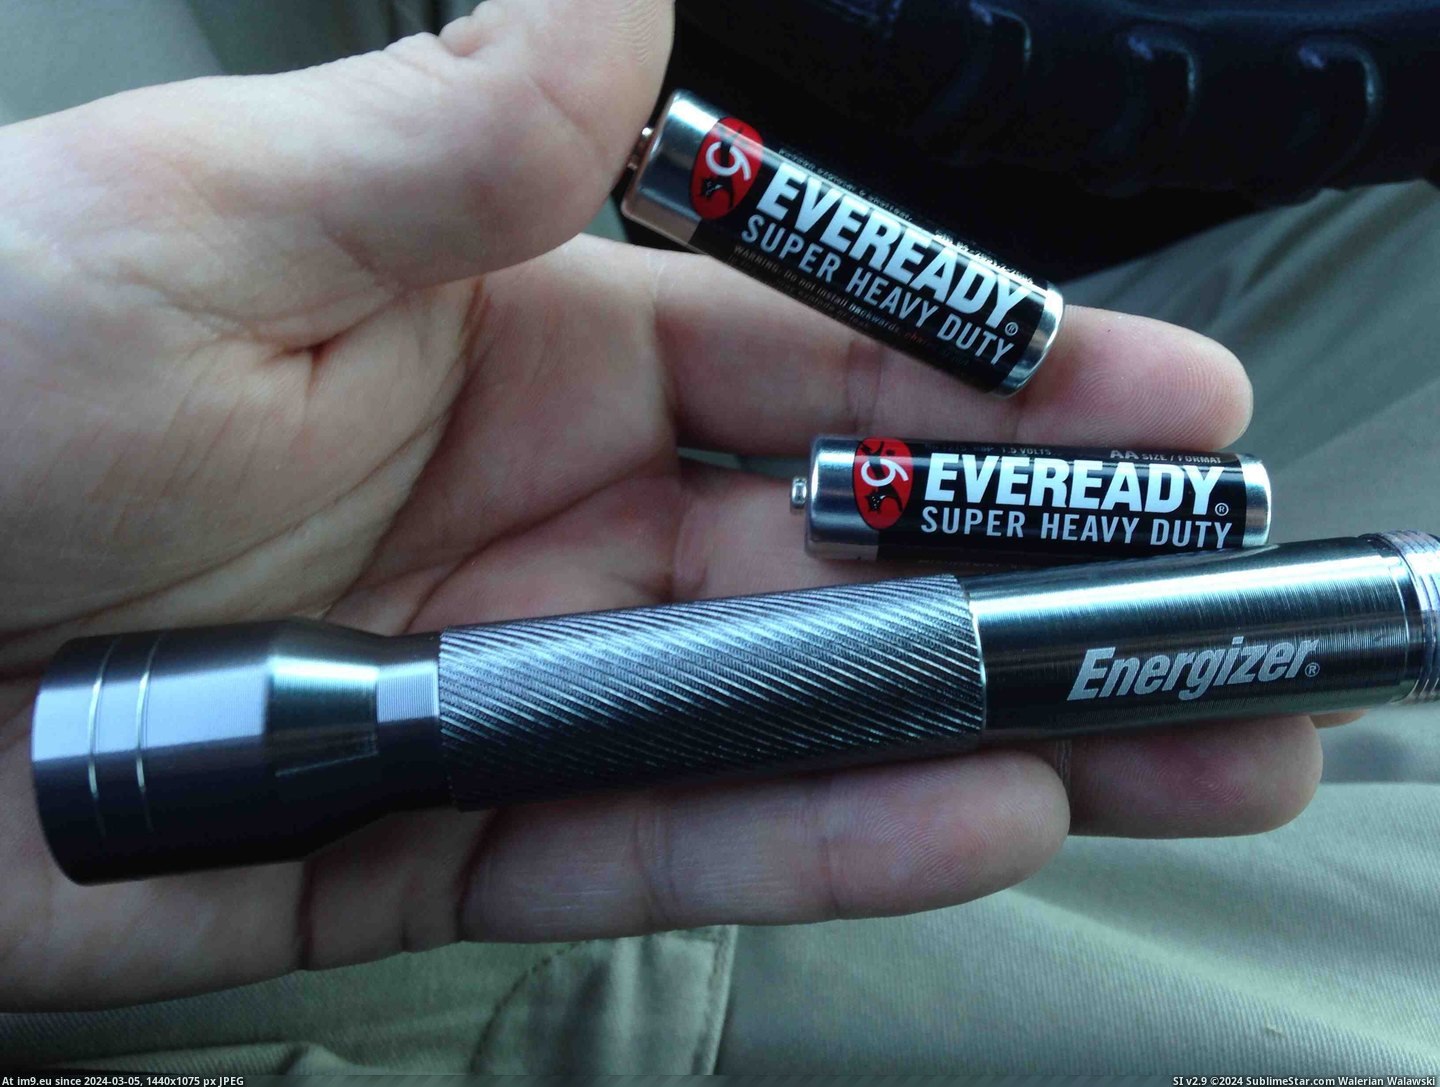 #Bought #Batteries #Eveready #Flashlight #Energizer [Pics] bought an energizer flashlight, it came with eveready batteries Pic. (Image of album My r/PICS favs))